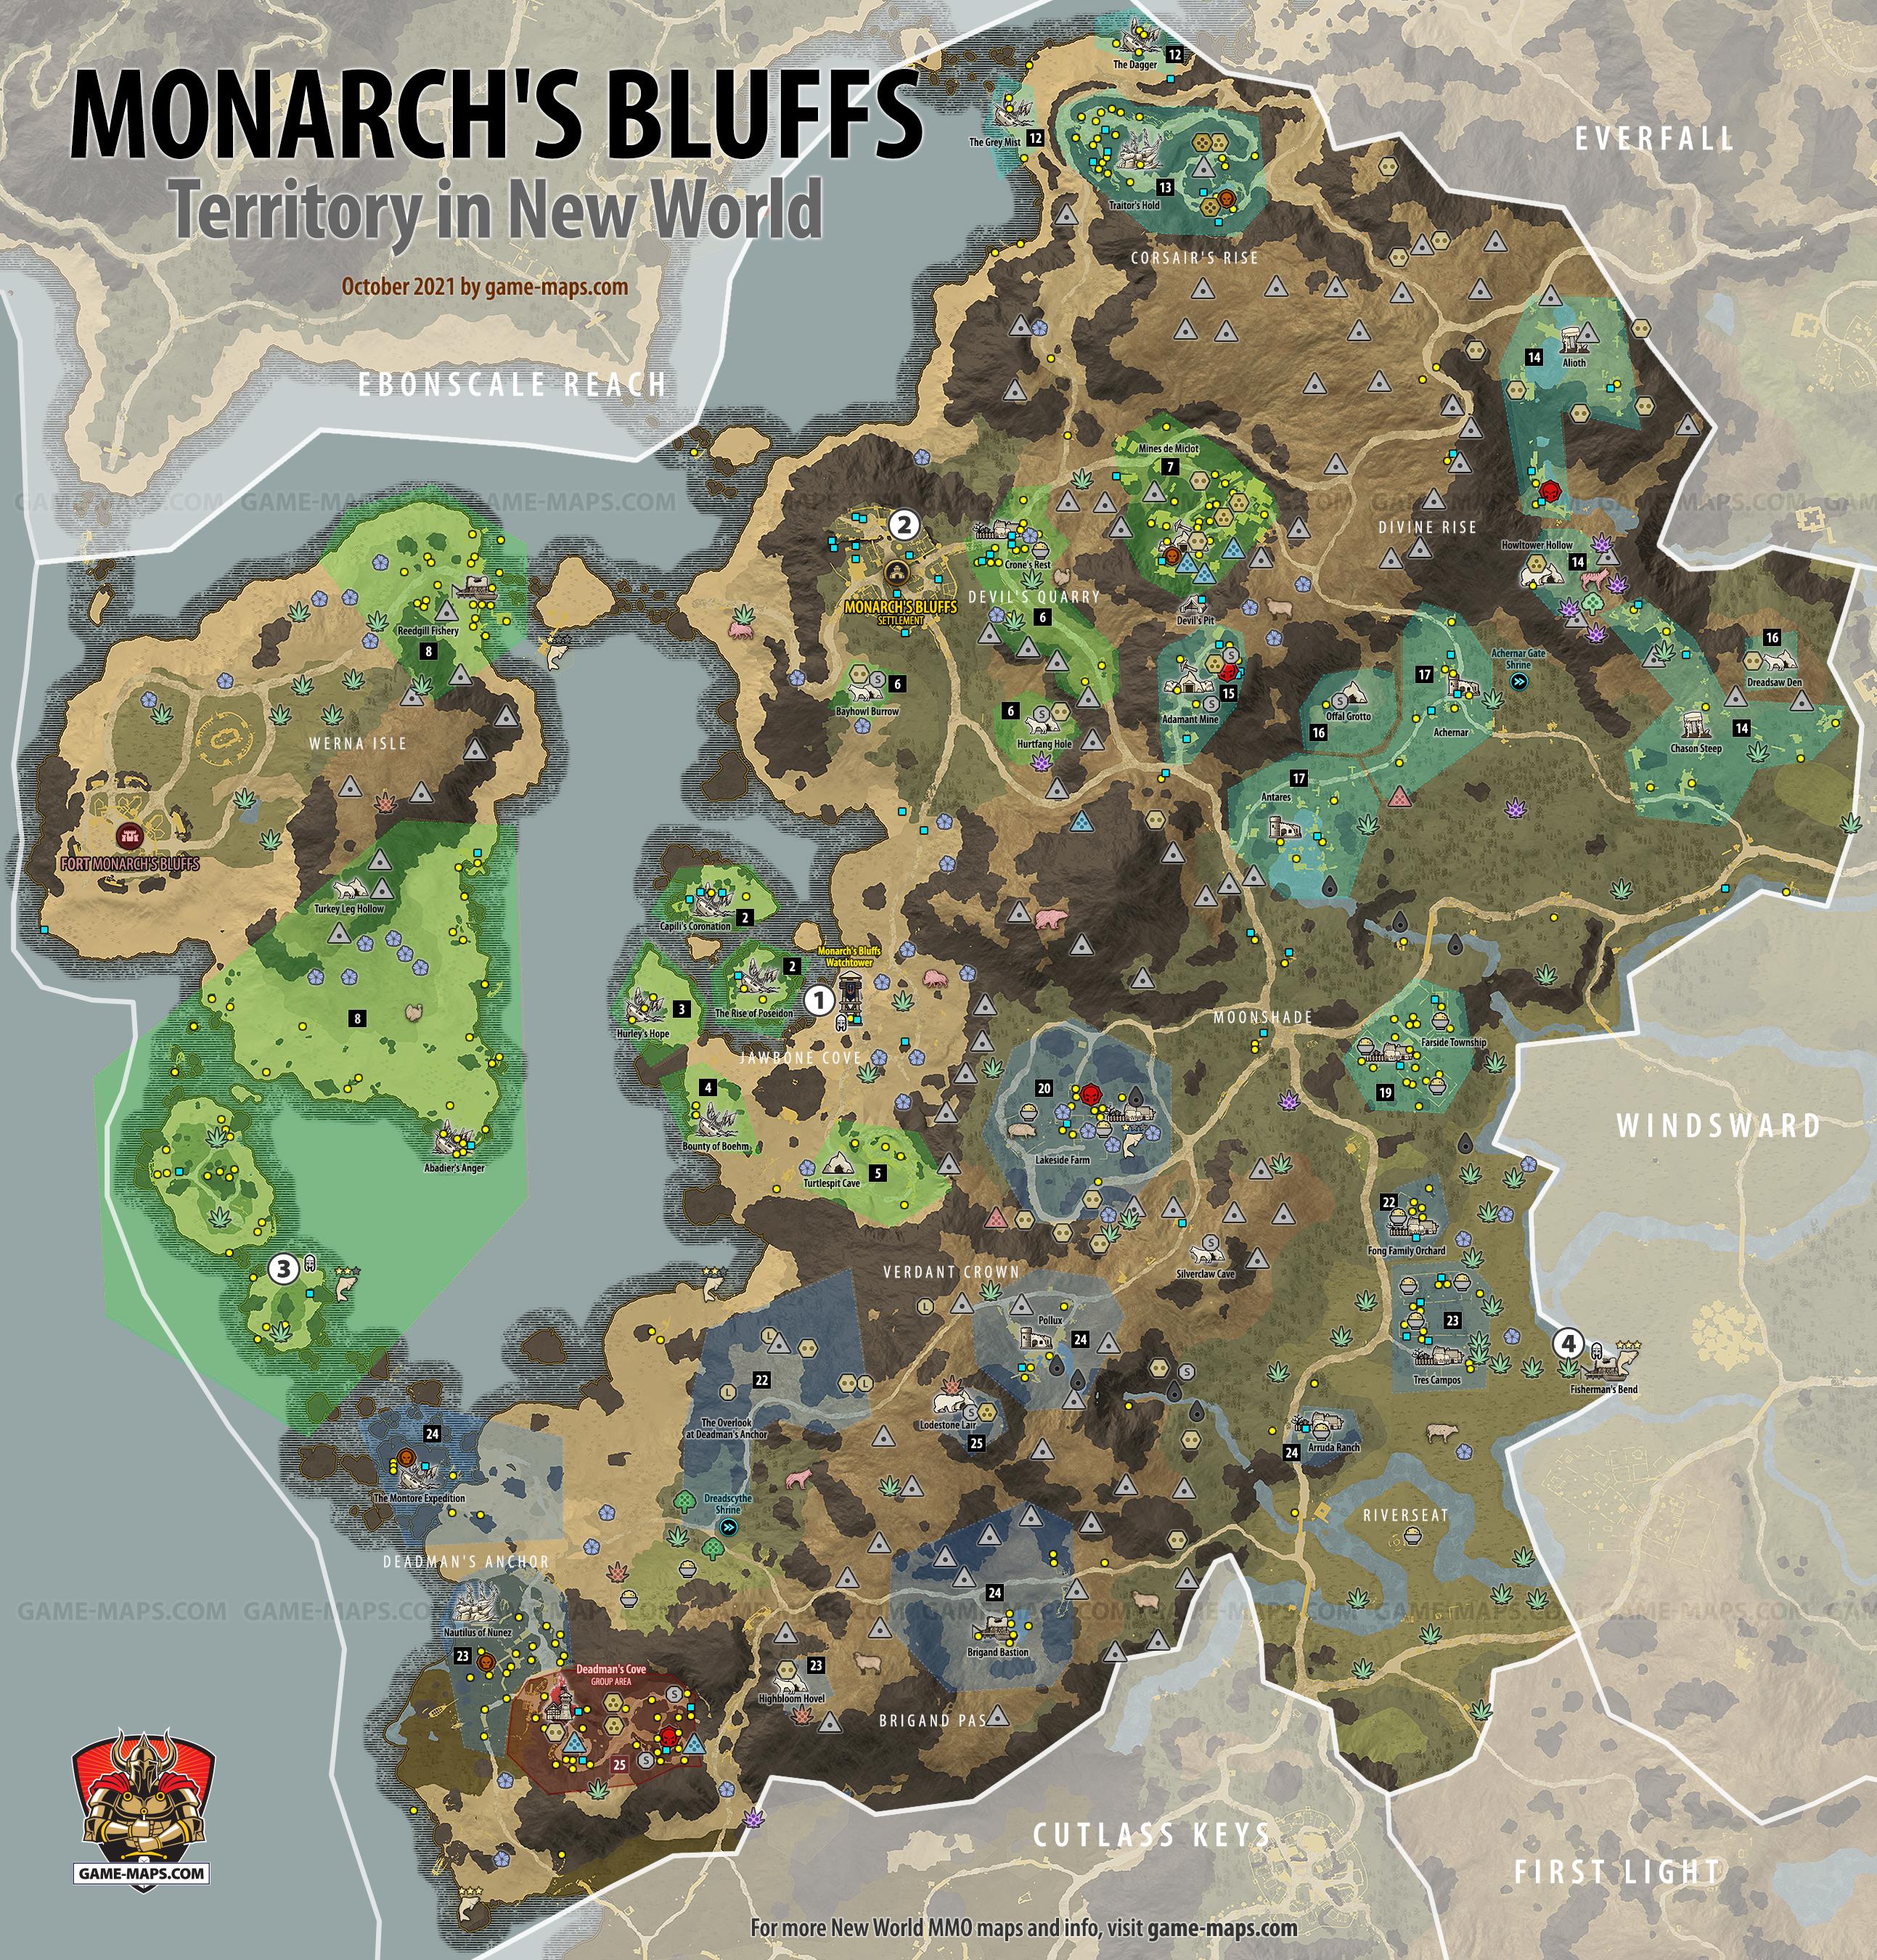 Monarch's Bluffs Territory Map for New World MMO